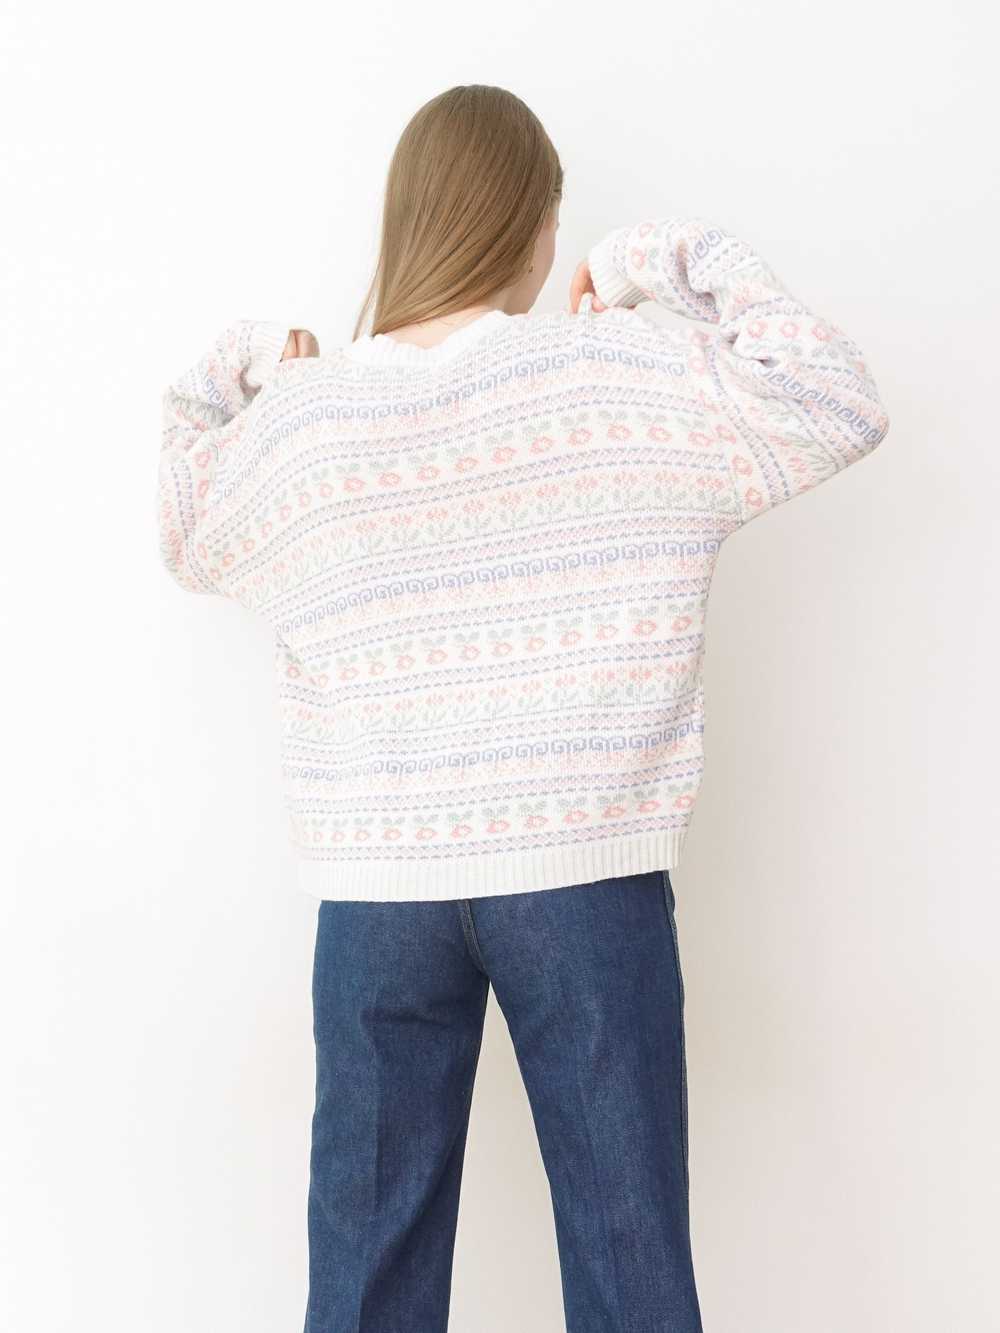 Cherry and Tulip Knit Sweater - image 2